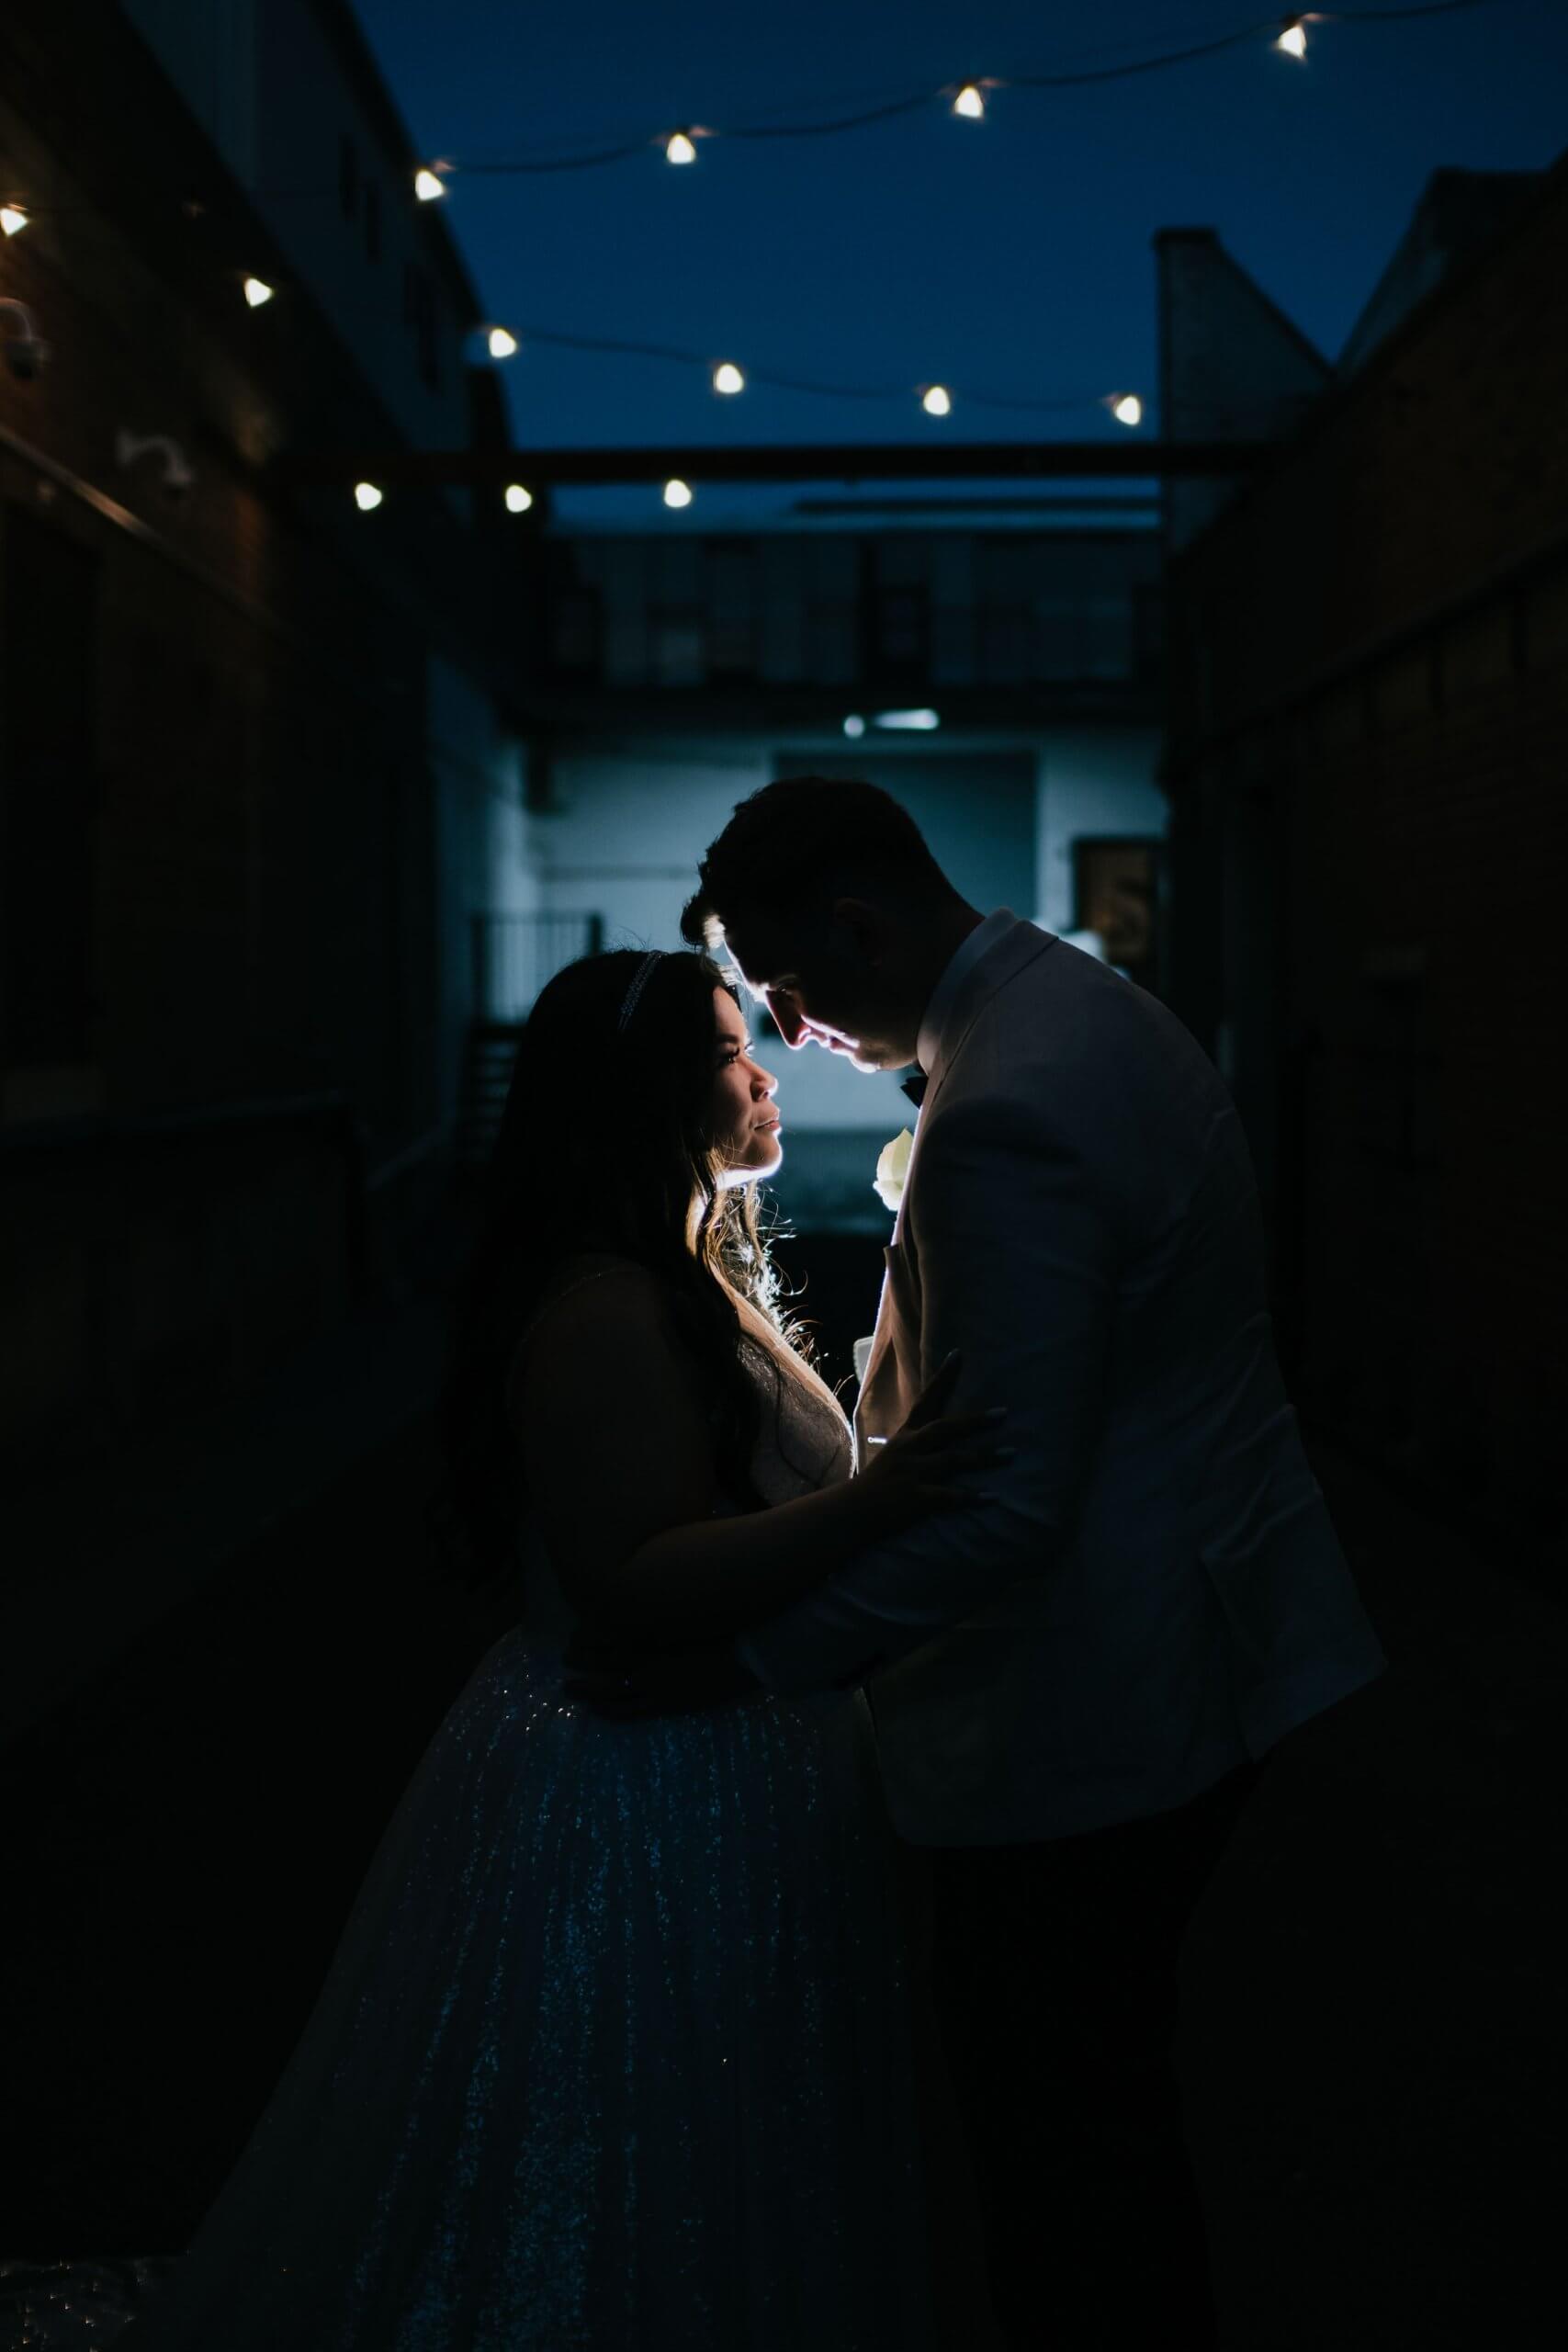 Beautiful photo captured during the night. The bride and groom's side profile silhouette is illuminated by artificial light placed in between them.